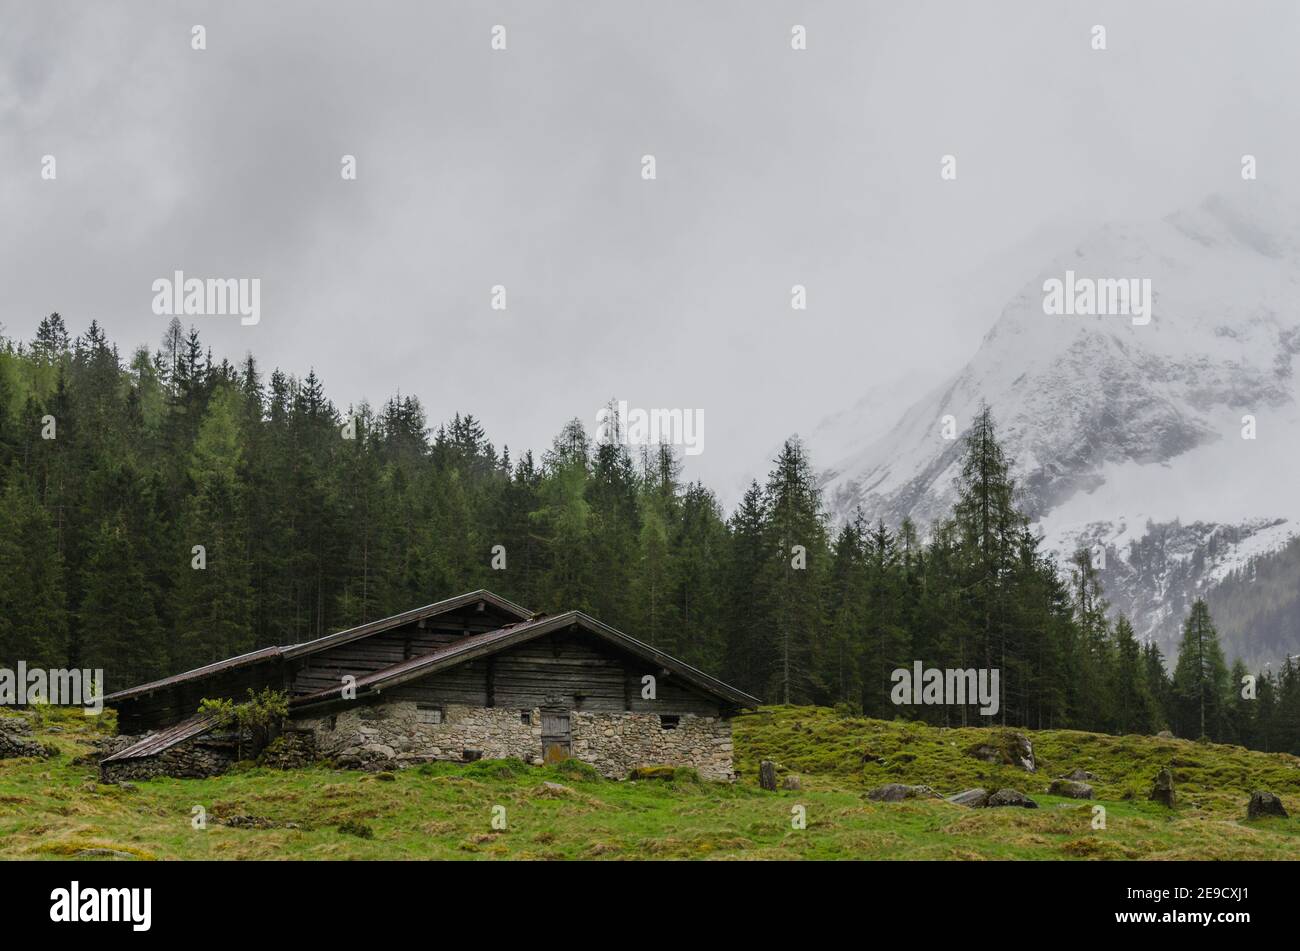 house in snowy mountains with forest Stock Photo